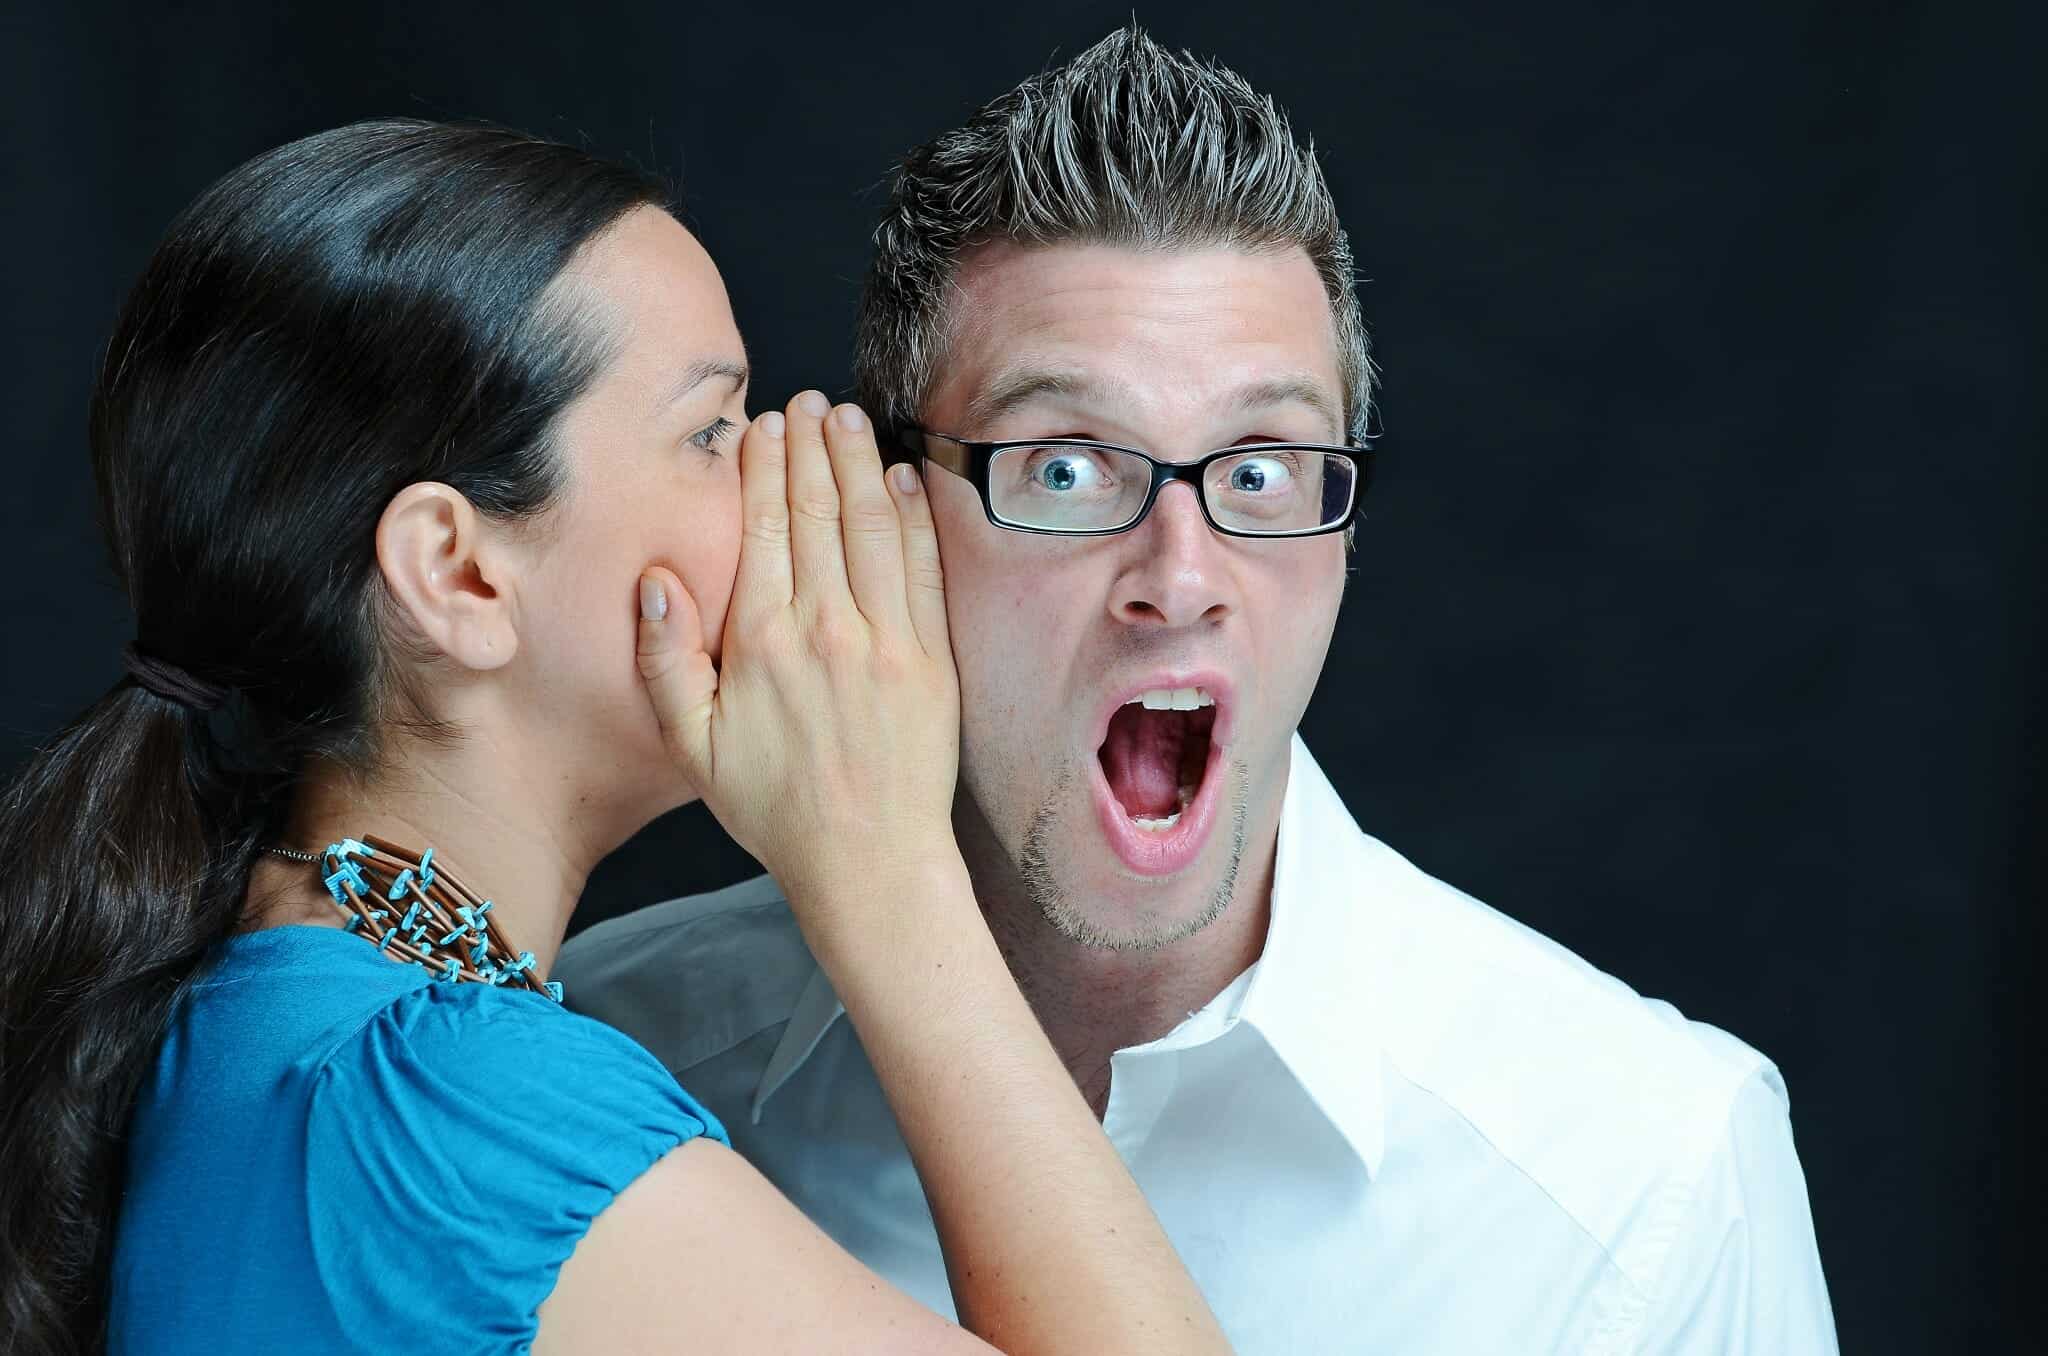 Woman whispers into a surprised man's ear. He can't believe what she says.